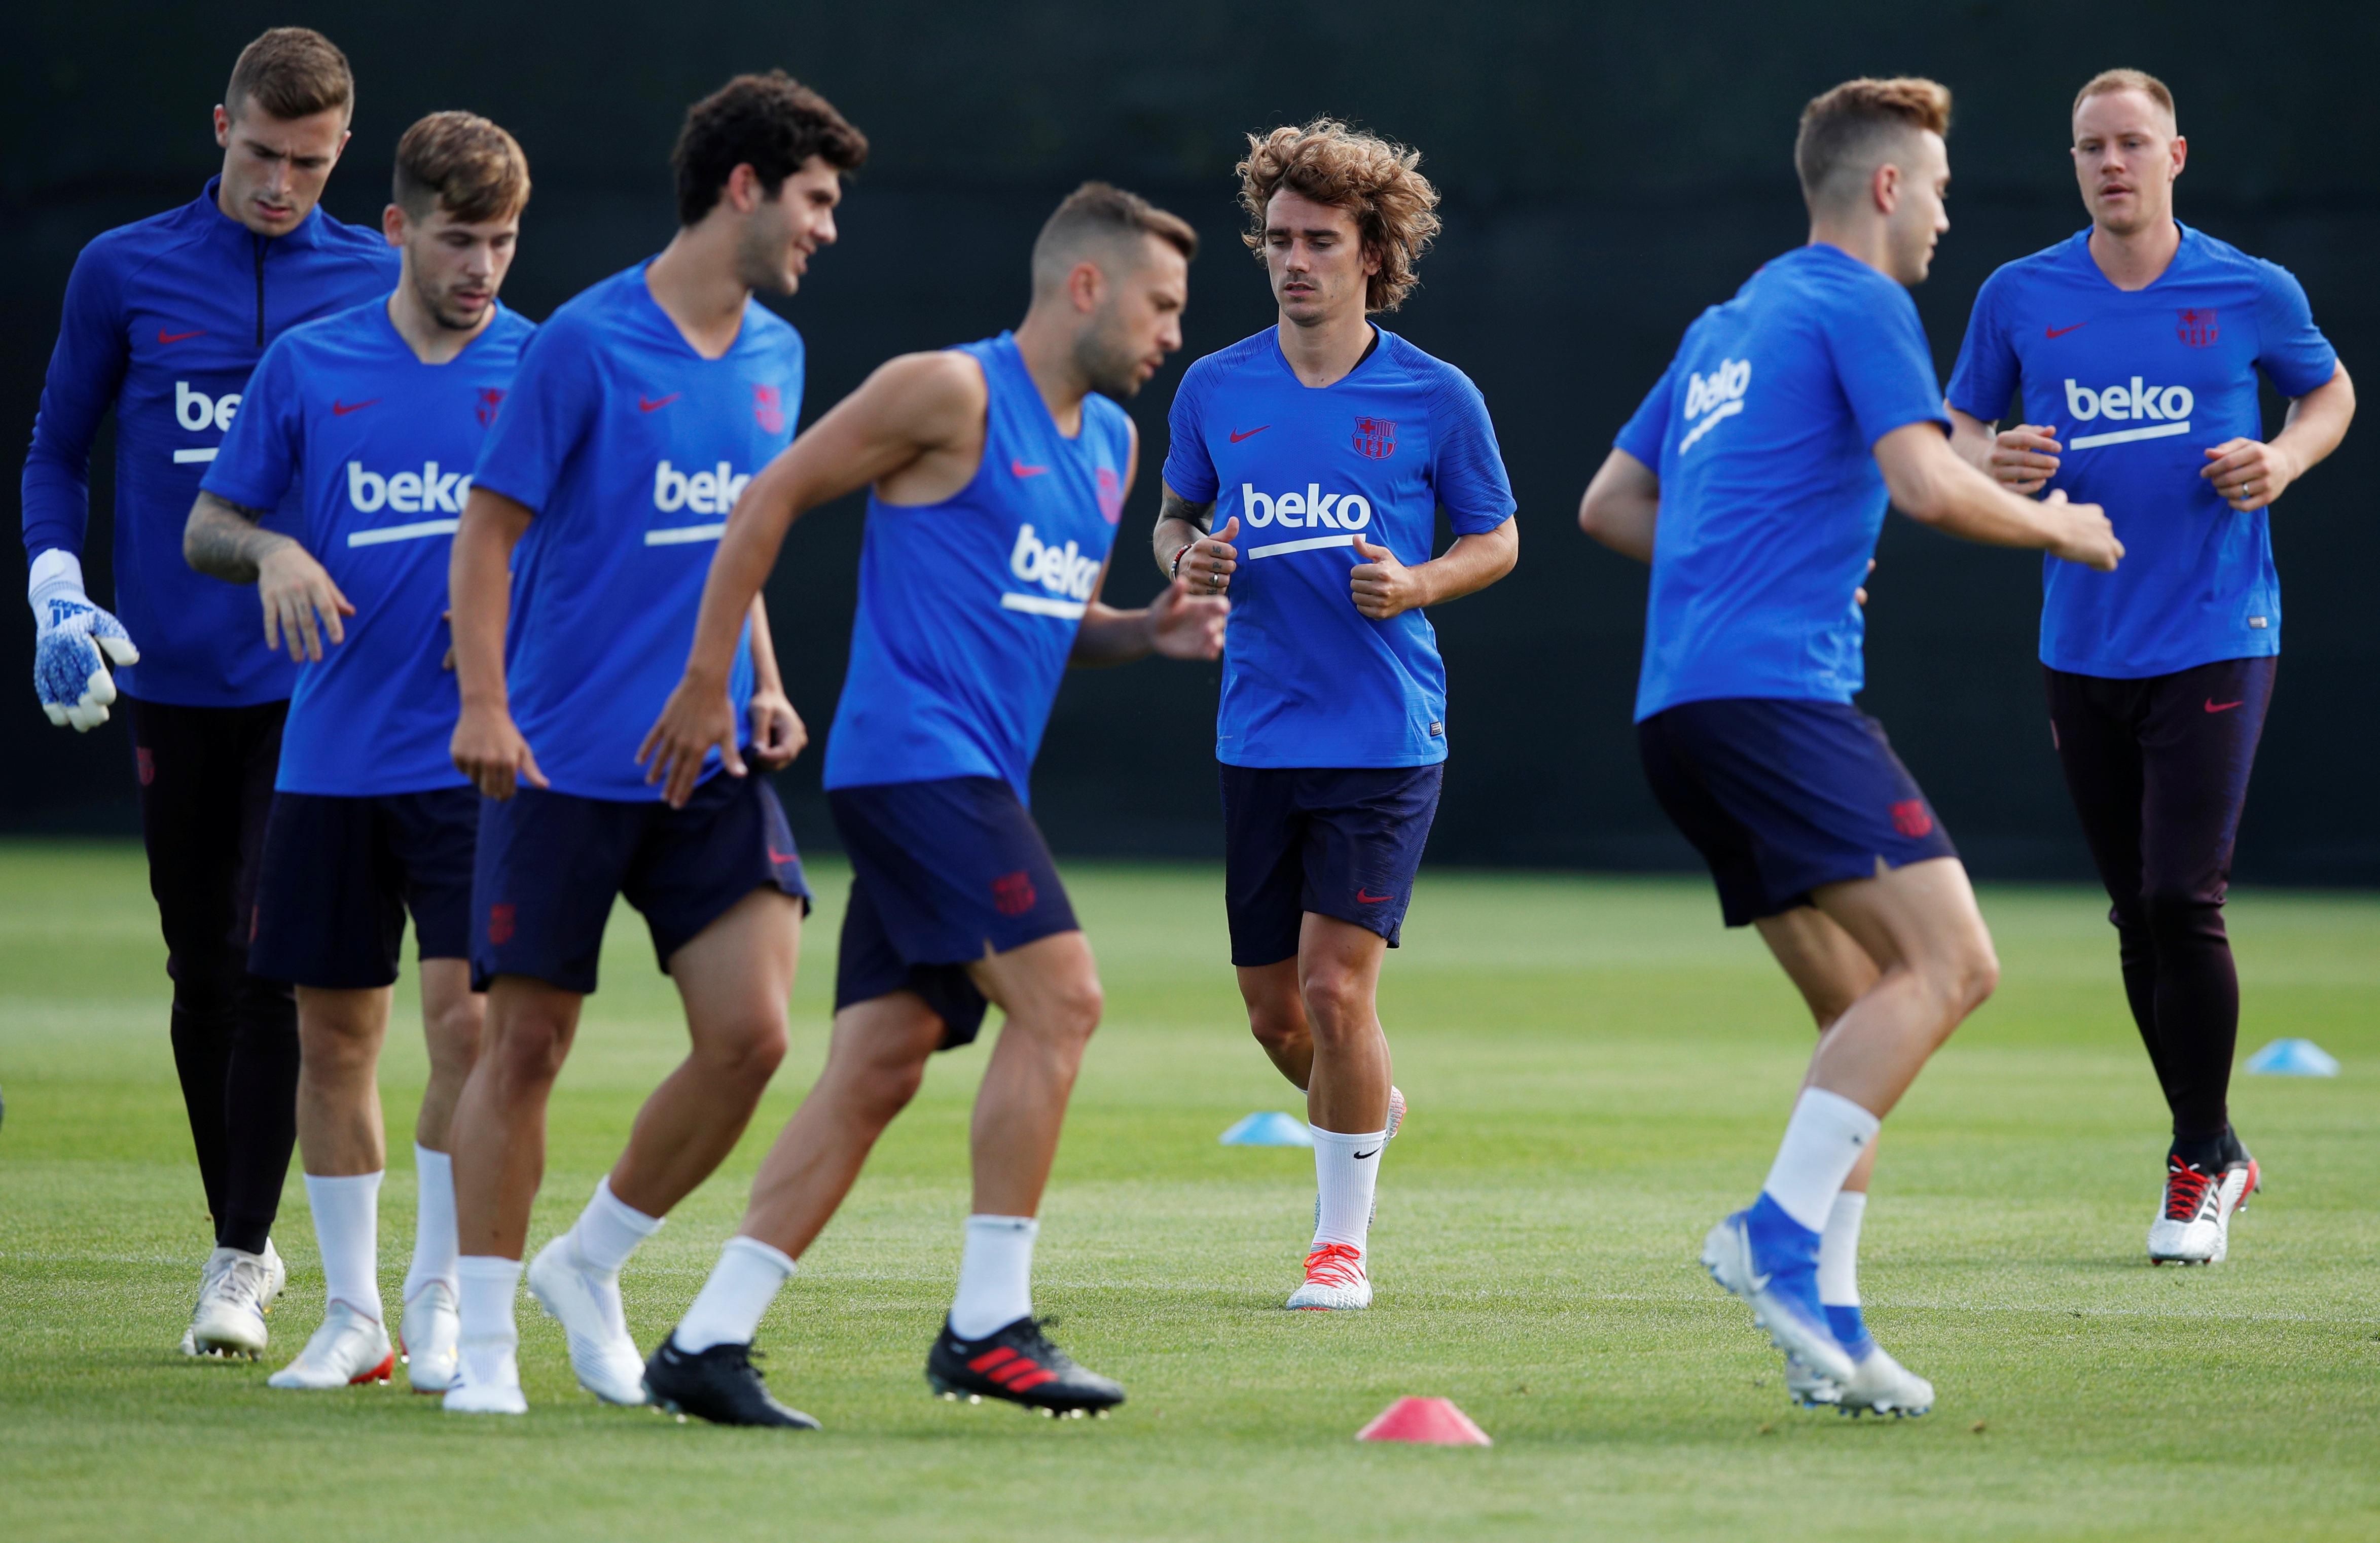 Image of one of the first 2019-2020 Barça season training sessions in July 2019 in Barcelona (by Reuters/Albert Gea)